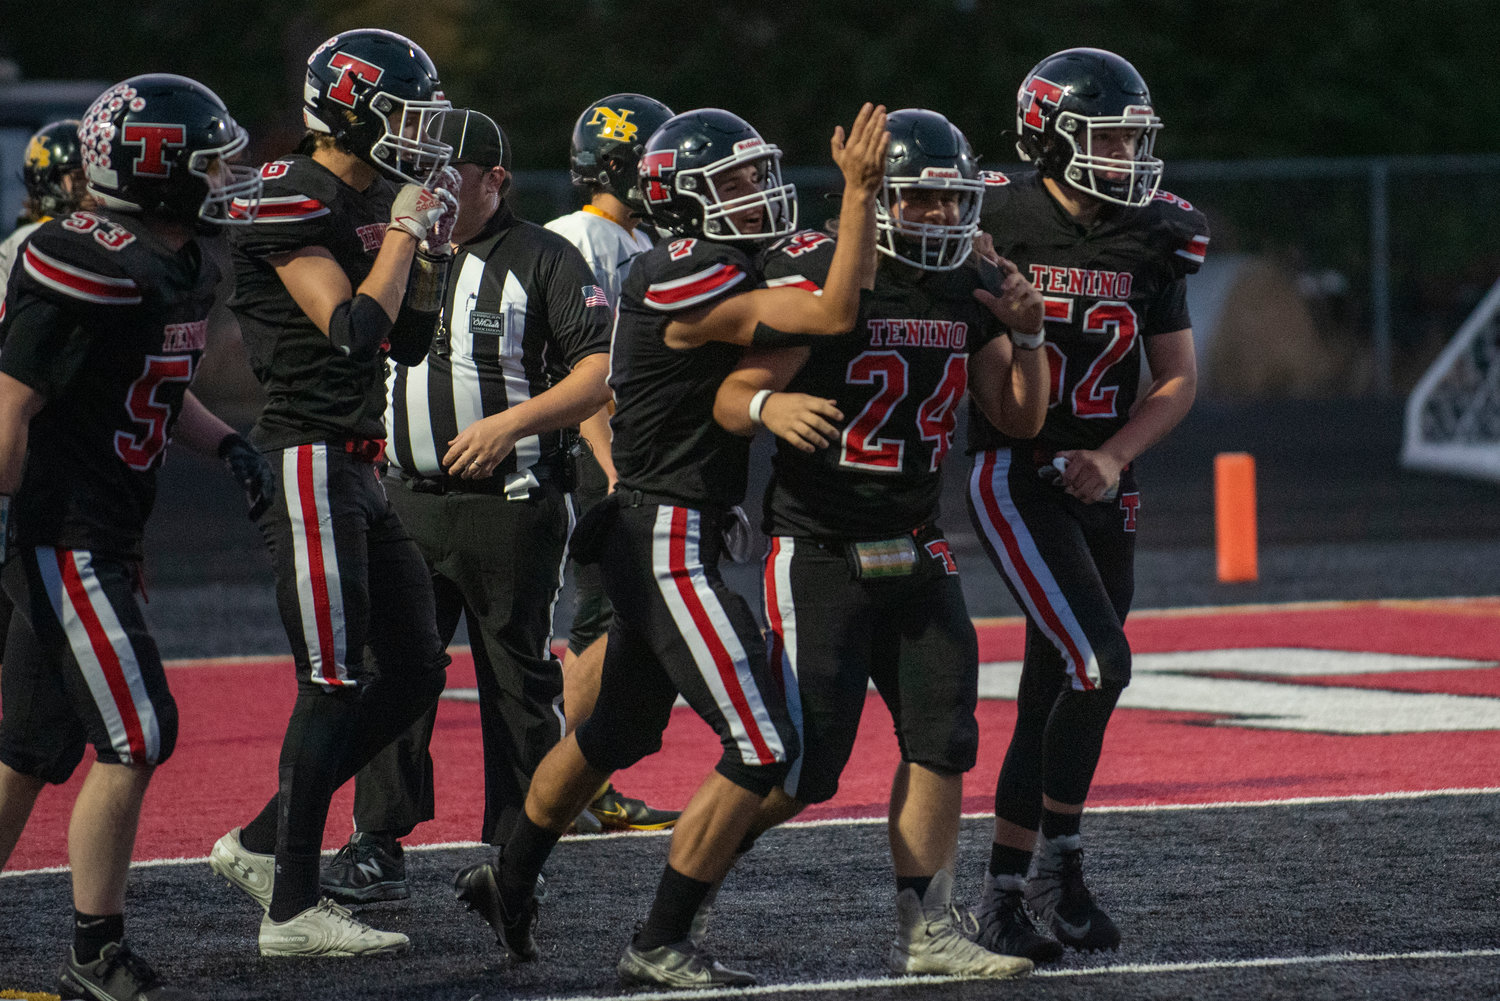 Tenino's Shawn Nicholson(24) is hounded by teammates after scoring on a long touchdown run against North Beach on Friday.